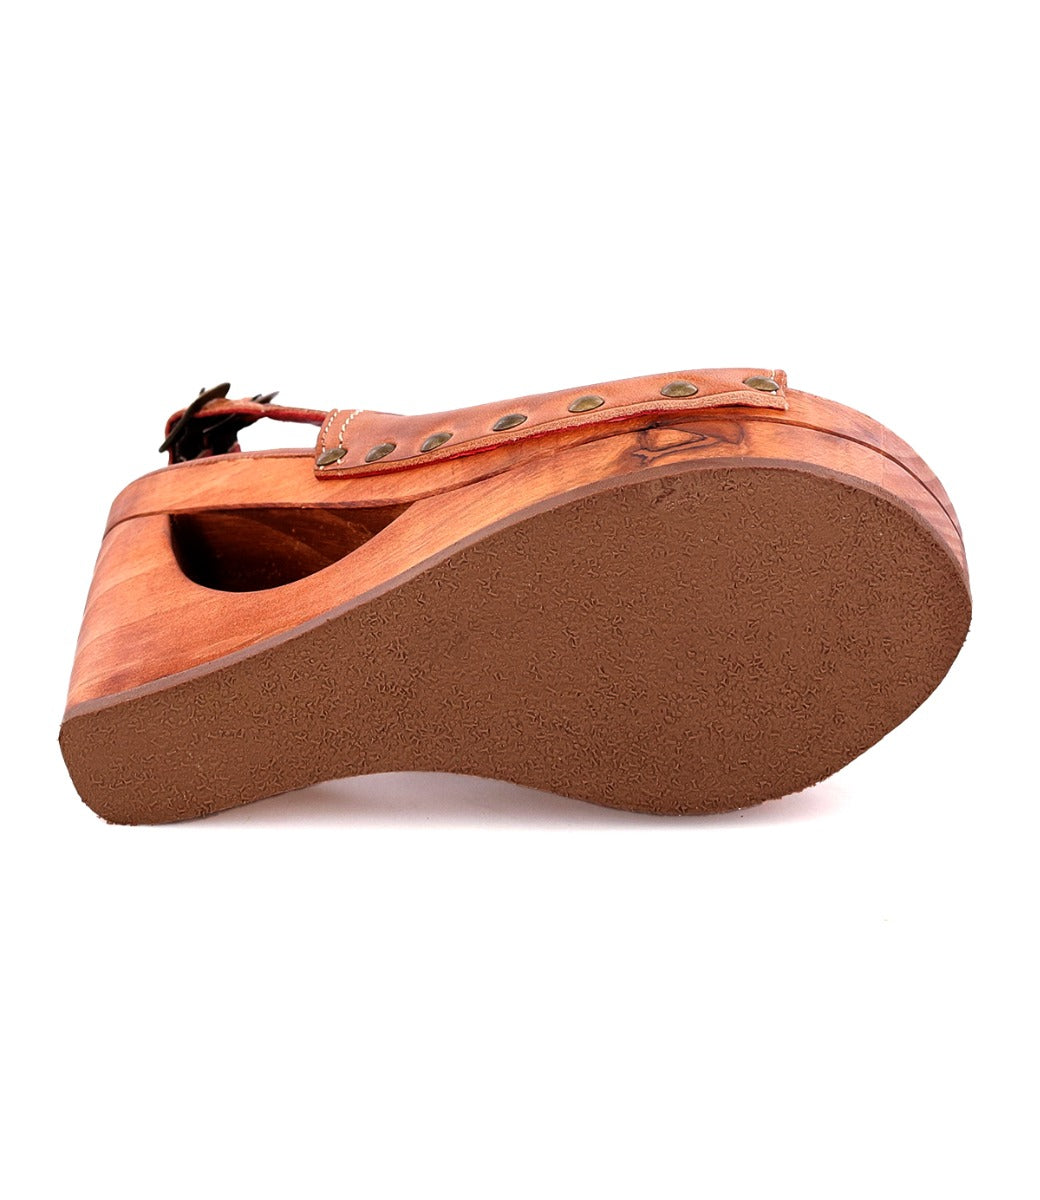 A pair of Bed Stu Imelda women's sandals with a wooden sole.